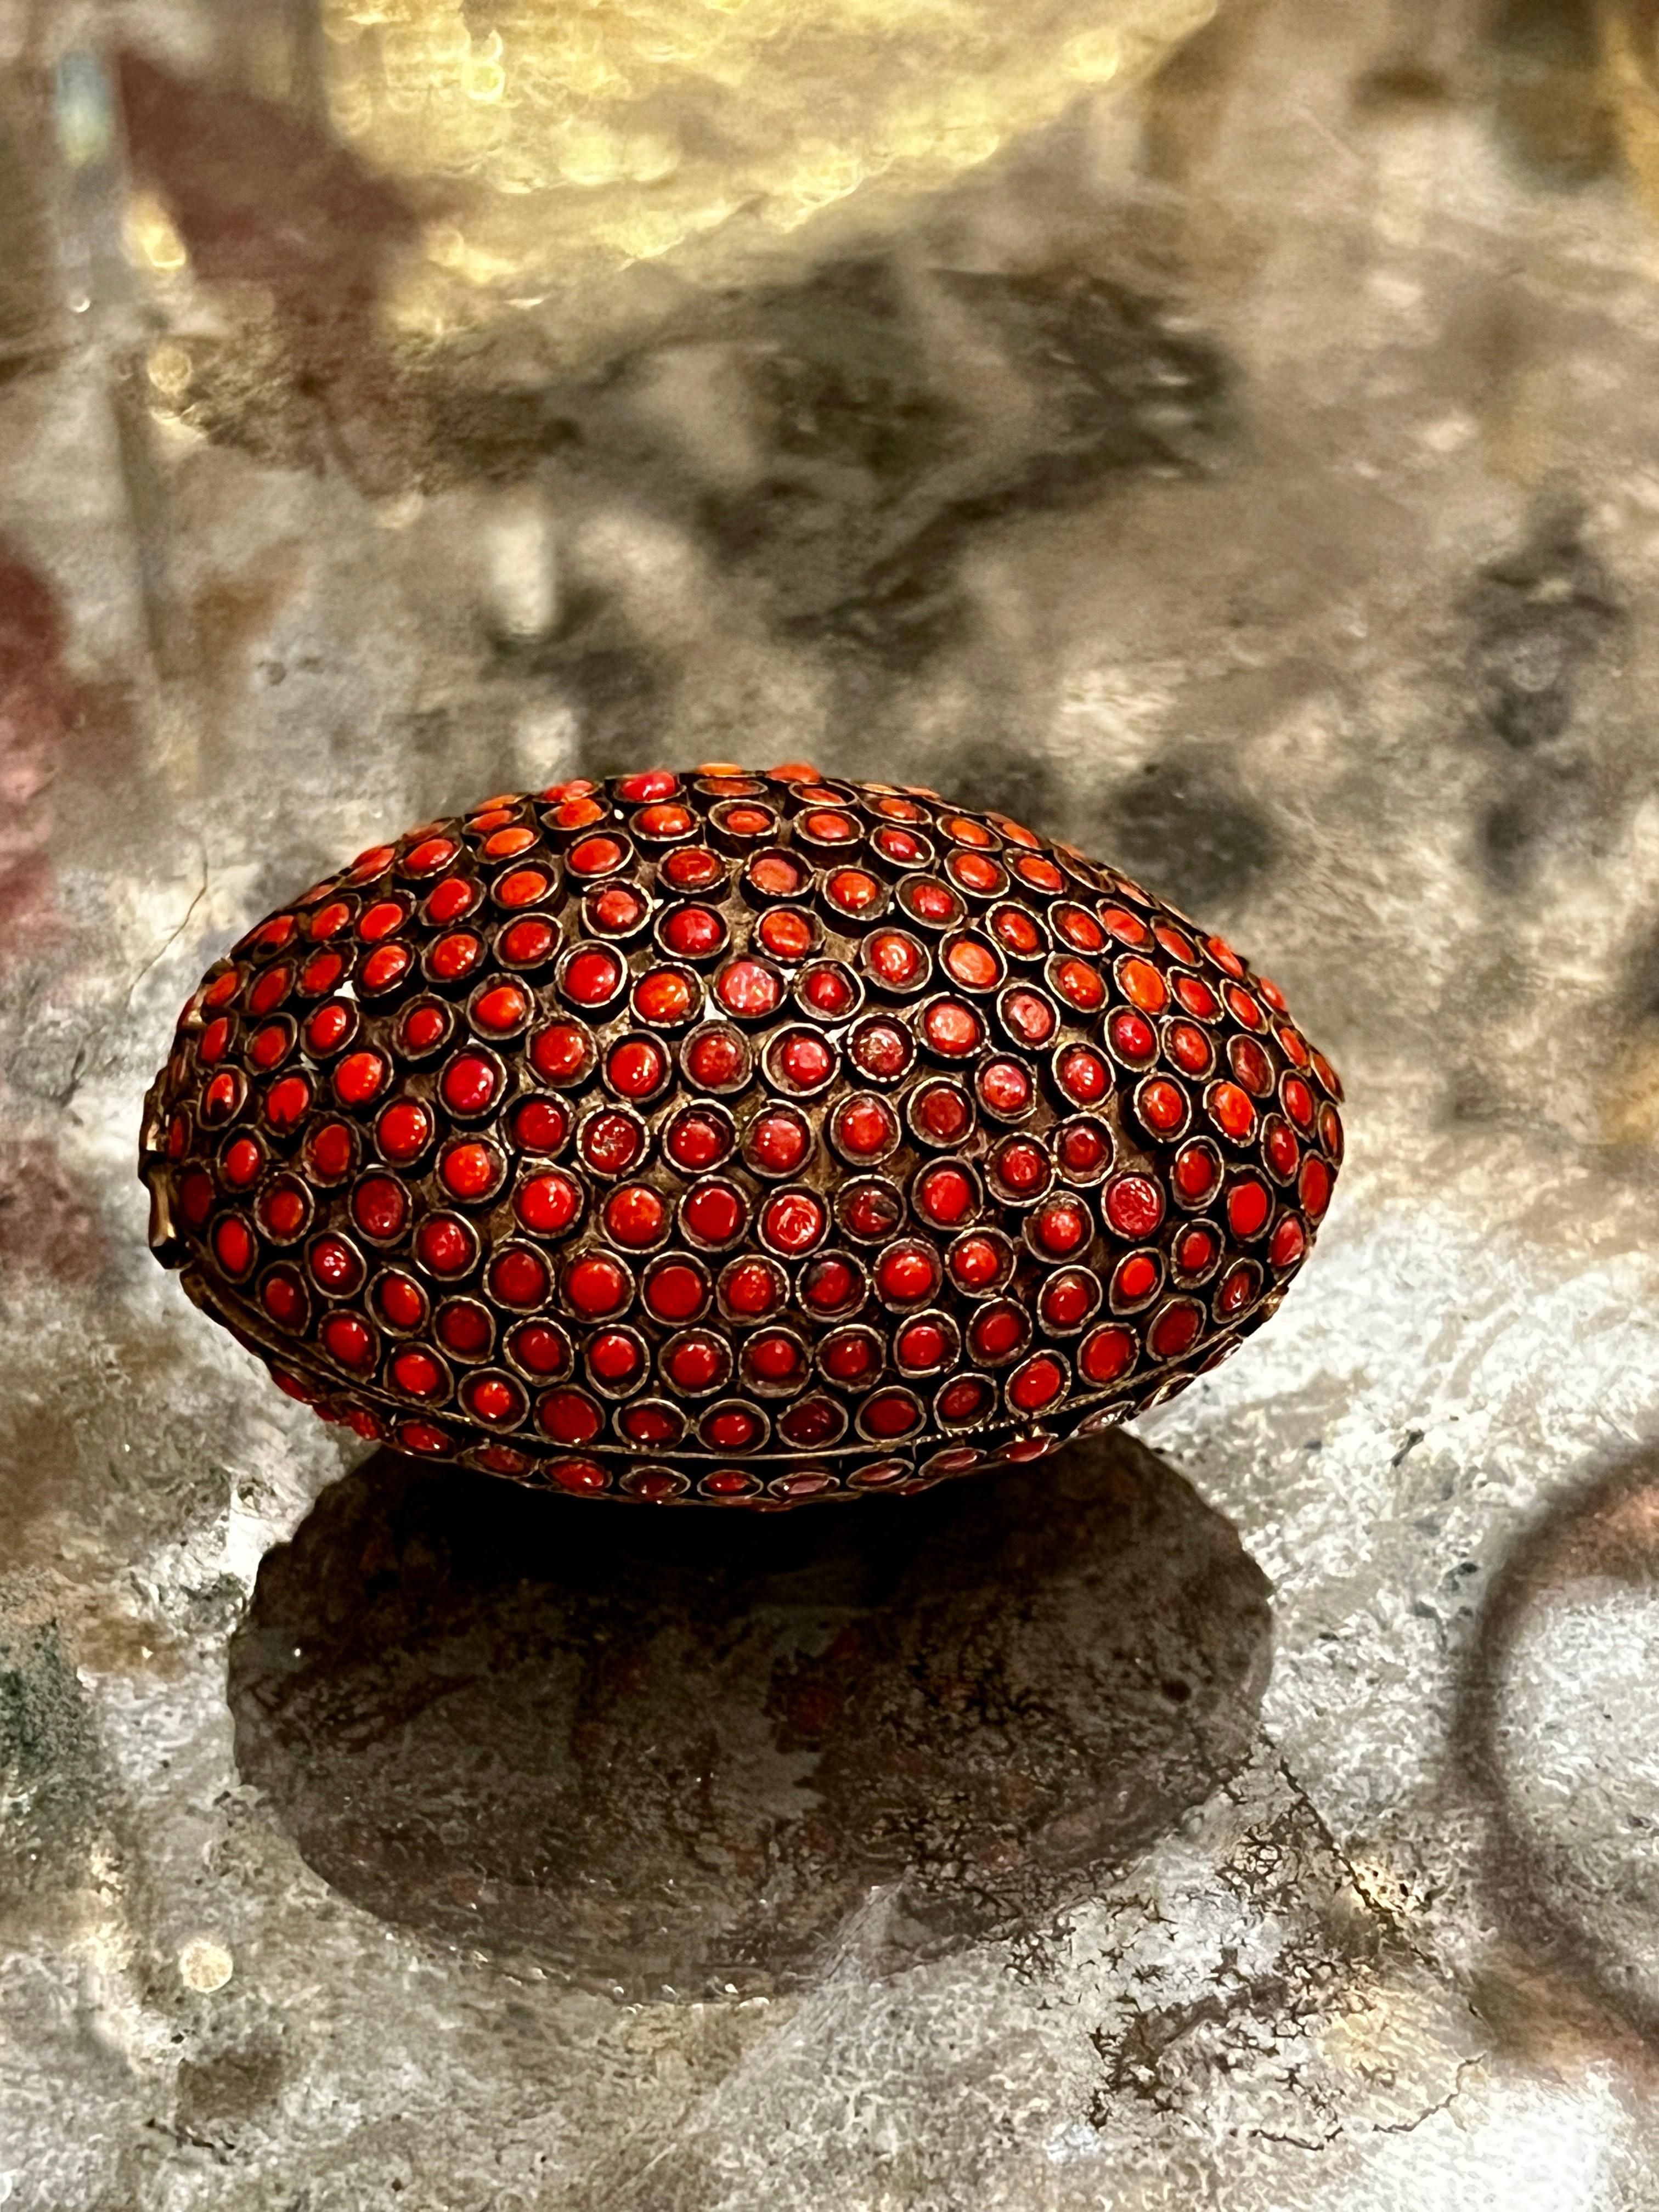 A circa 1950's Turkish carnelian and gilt bronze hinged egg object d'art jewellery box that opens easily.

Measurements:
Length: 3